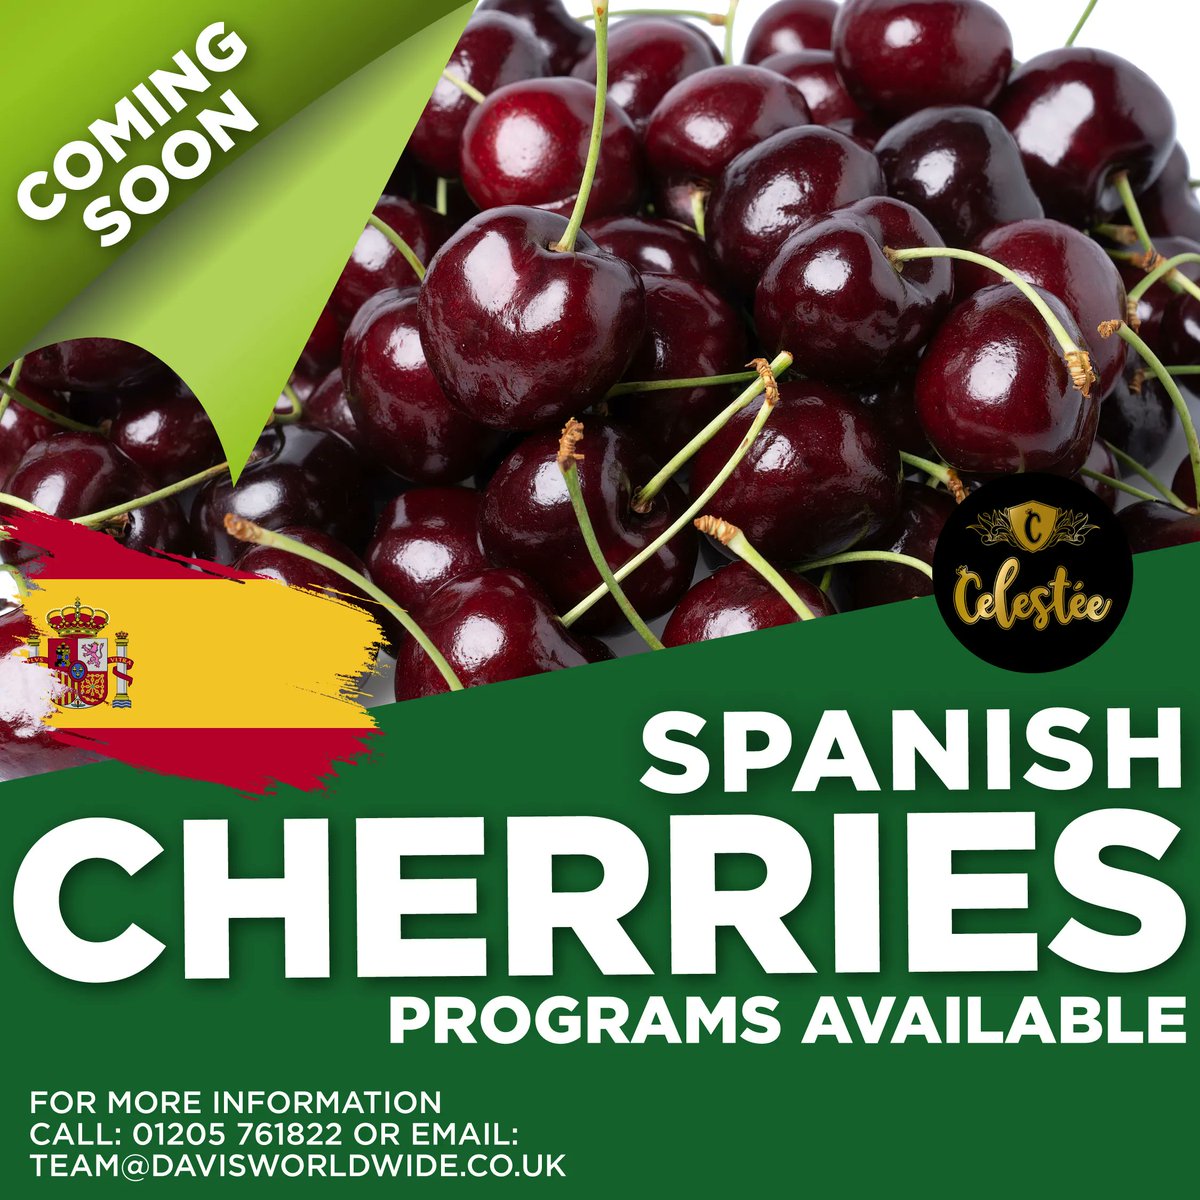 The Very Best Spanish Cherries, enjoy the best tasting cherries, delicious, juicy & full of flavour.
Order yours today. For further information call 01205 761822 or email team@davisworldwide.co.uk 
#cherries #freshcherries #cherry #fruit #fruits #freshfruit #5aday #snack #red